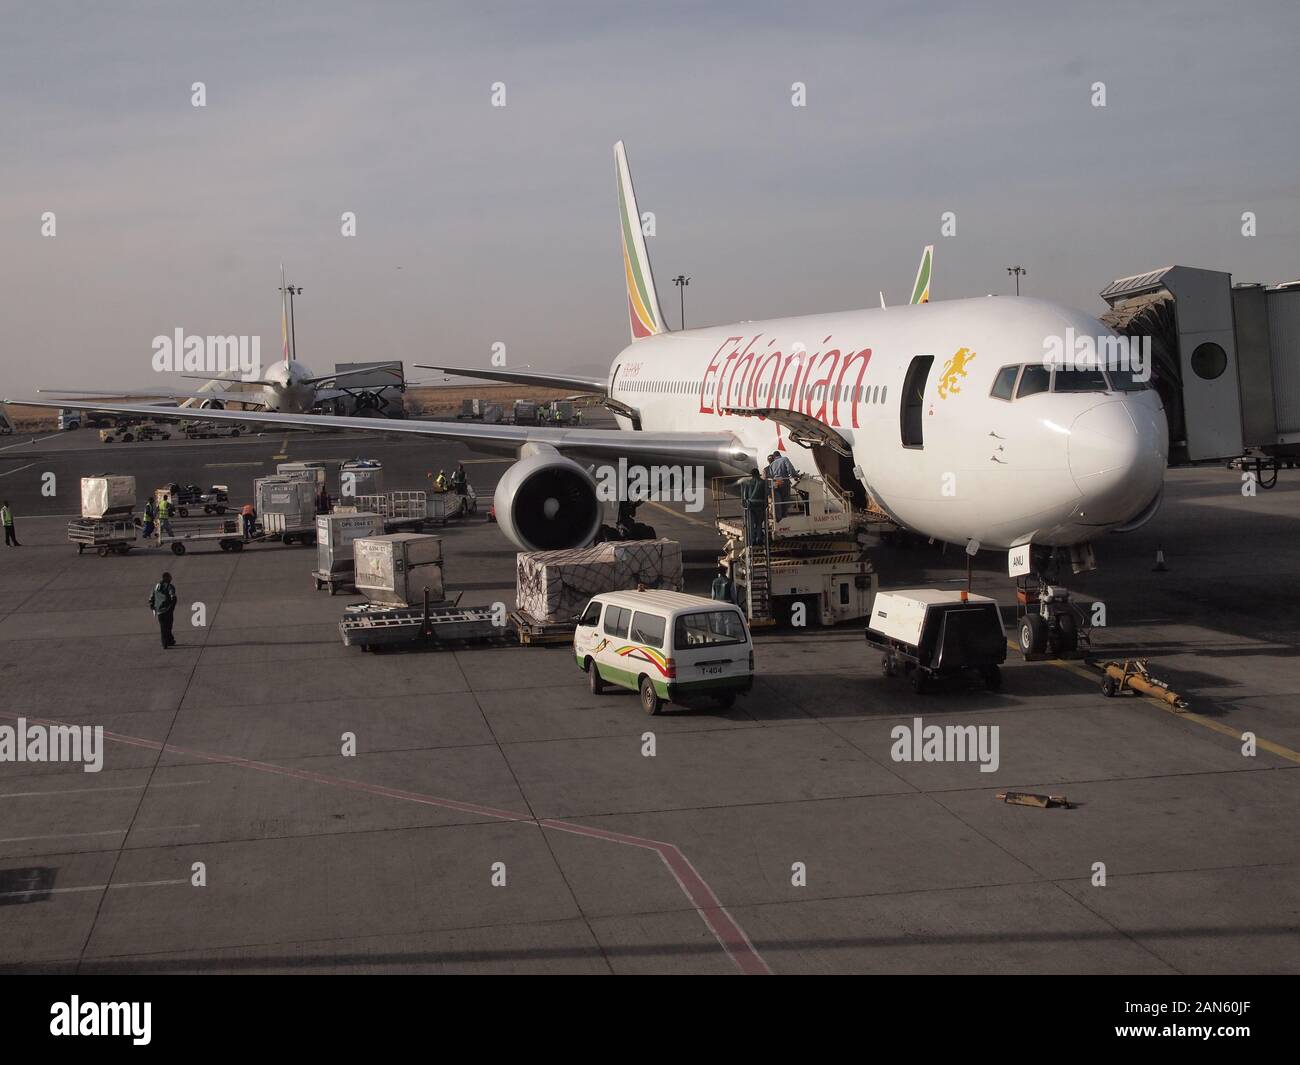 Ethiopian airlines refueling at airport Stock Photo